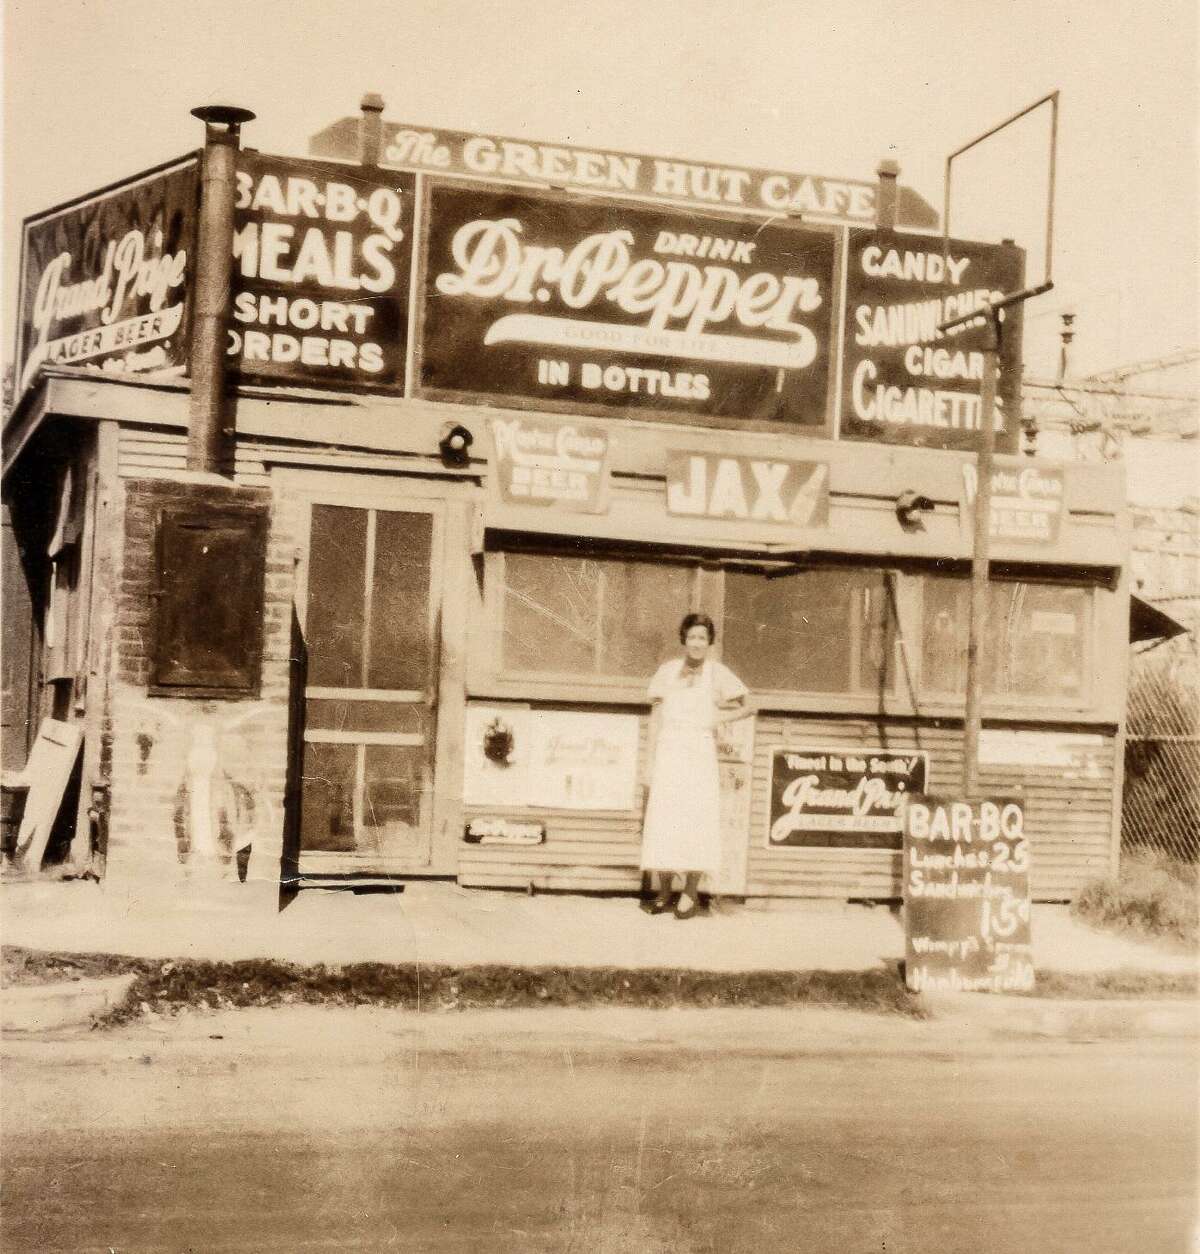 Leona Ginn stands near a vertical brick smoker on the front of The Green Hut Café on Quitman Street in 1934.